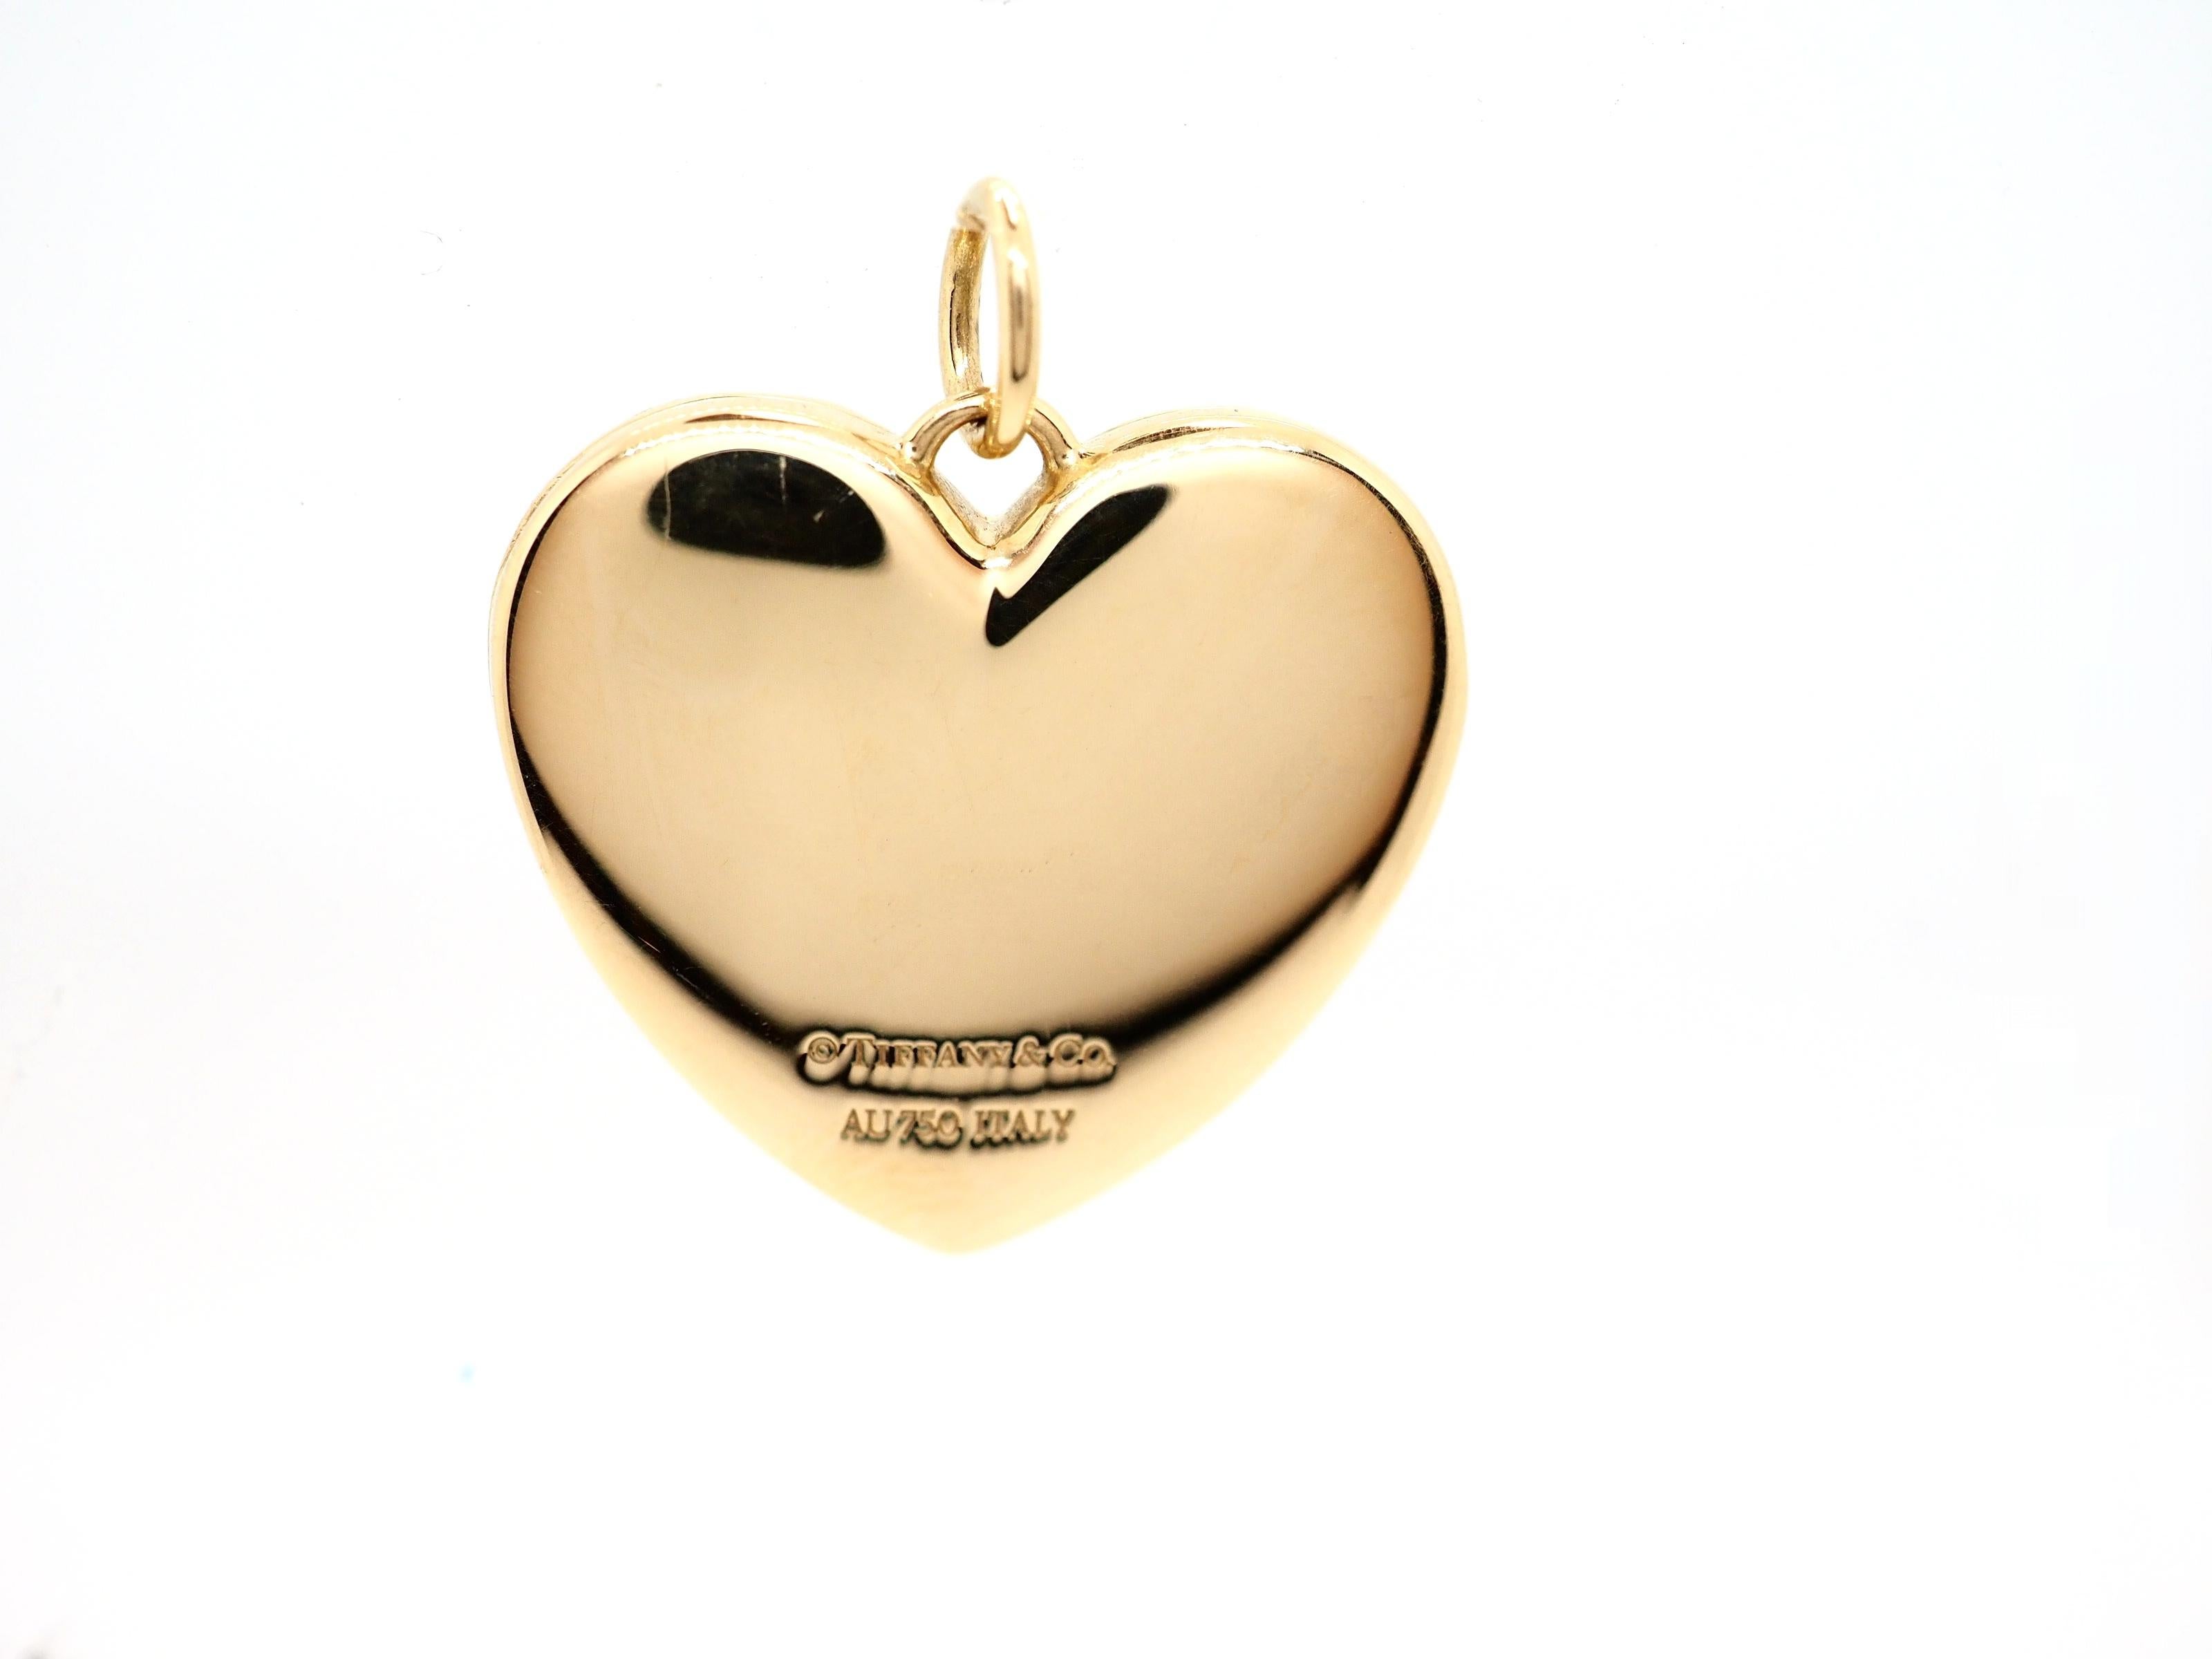 A rare authentic pendant made of 18 Karat yellow gold  (usually the is designed as a puffed high polished yellow gold heart. Opens on a hinge to reveal two heart shaped box where you can place the photos or something special and private for you.